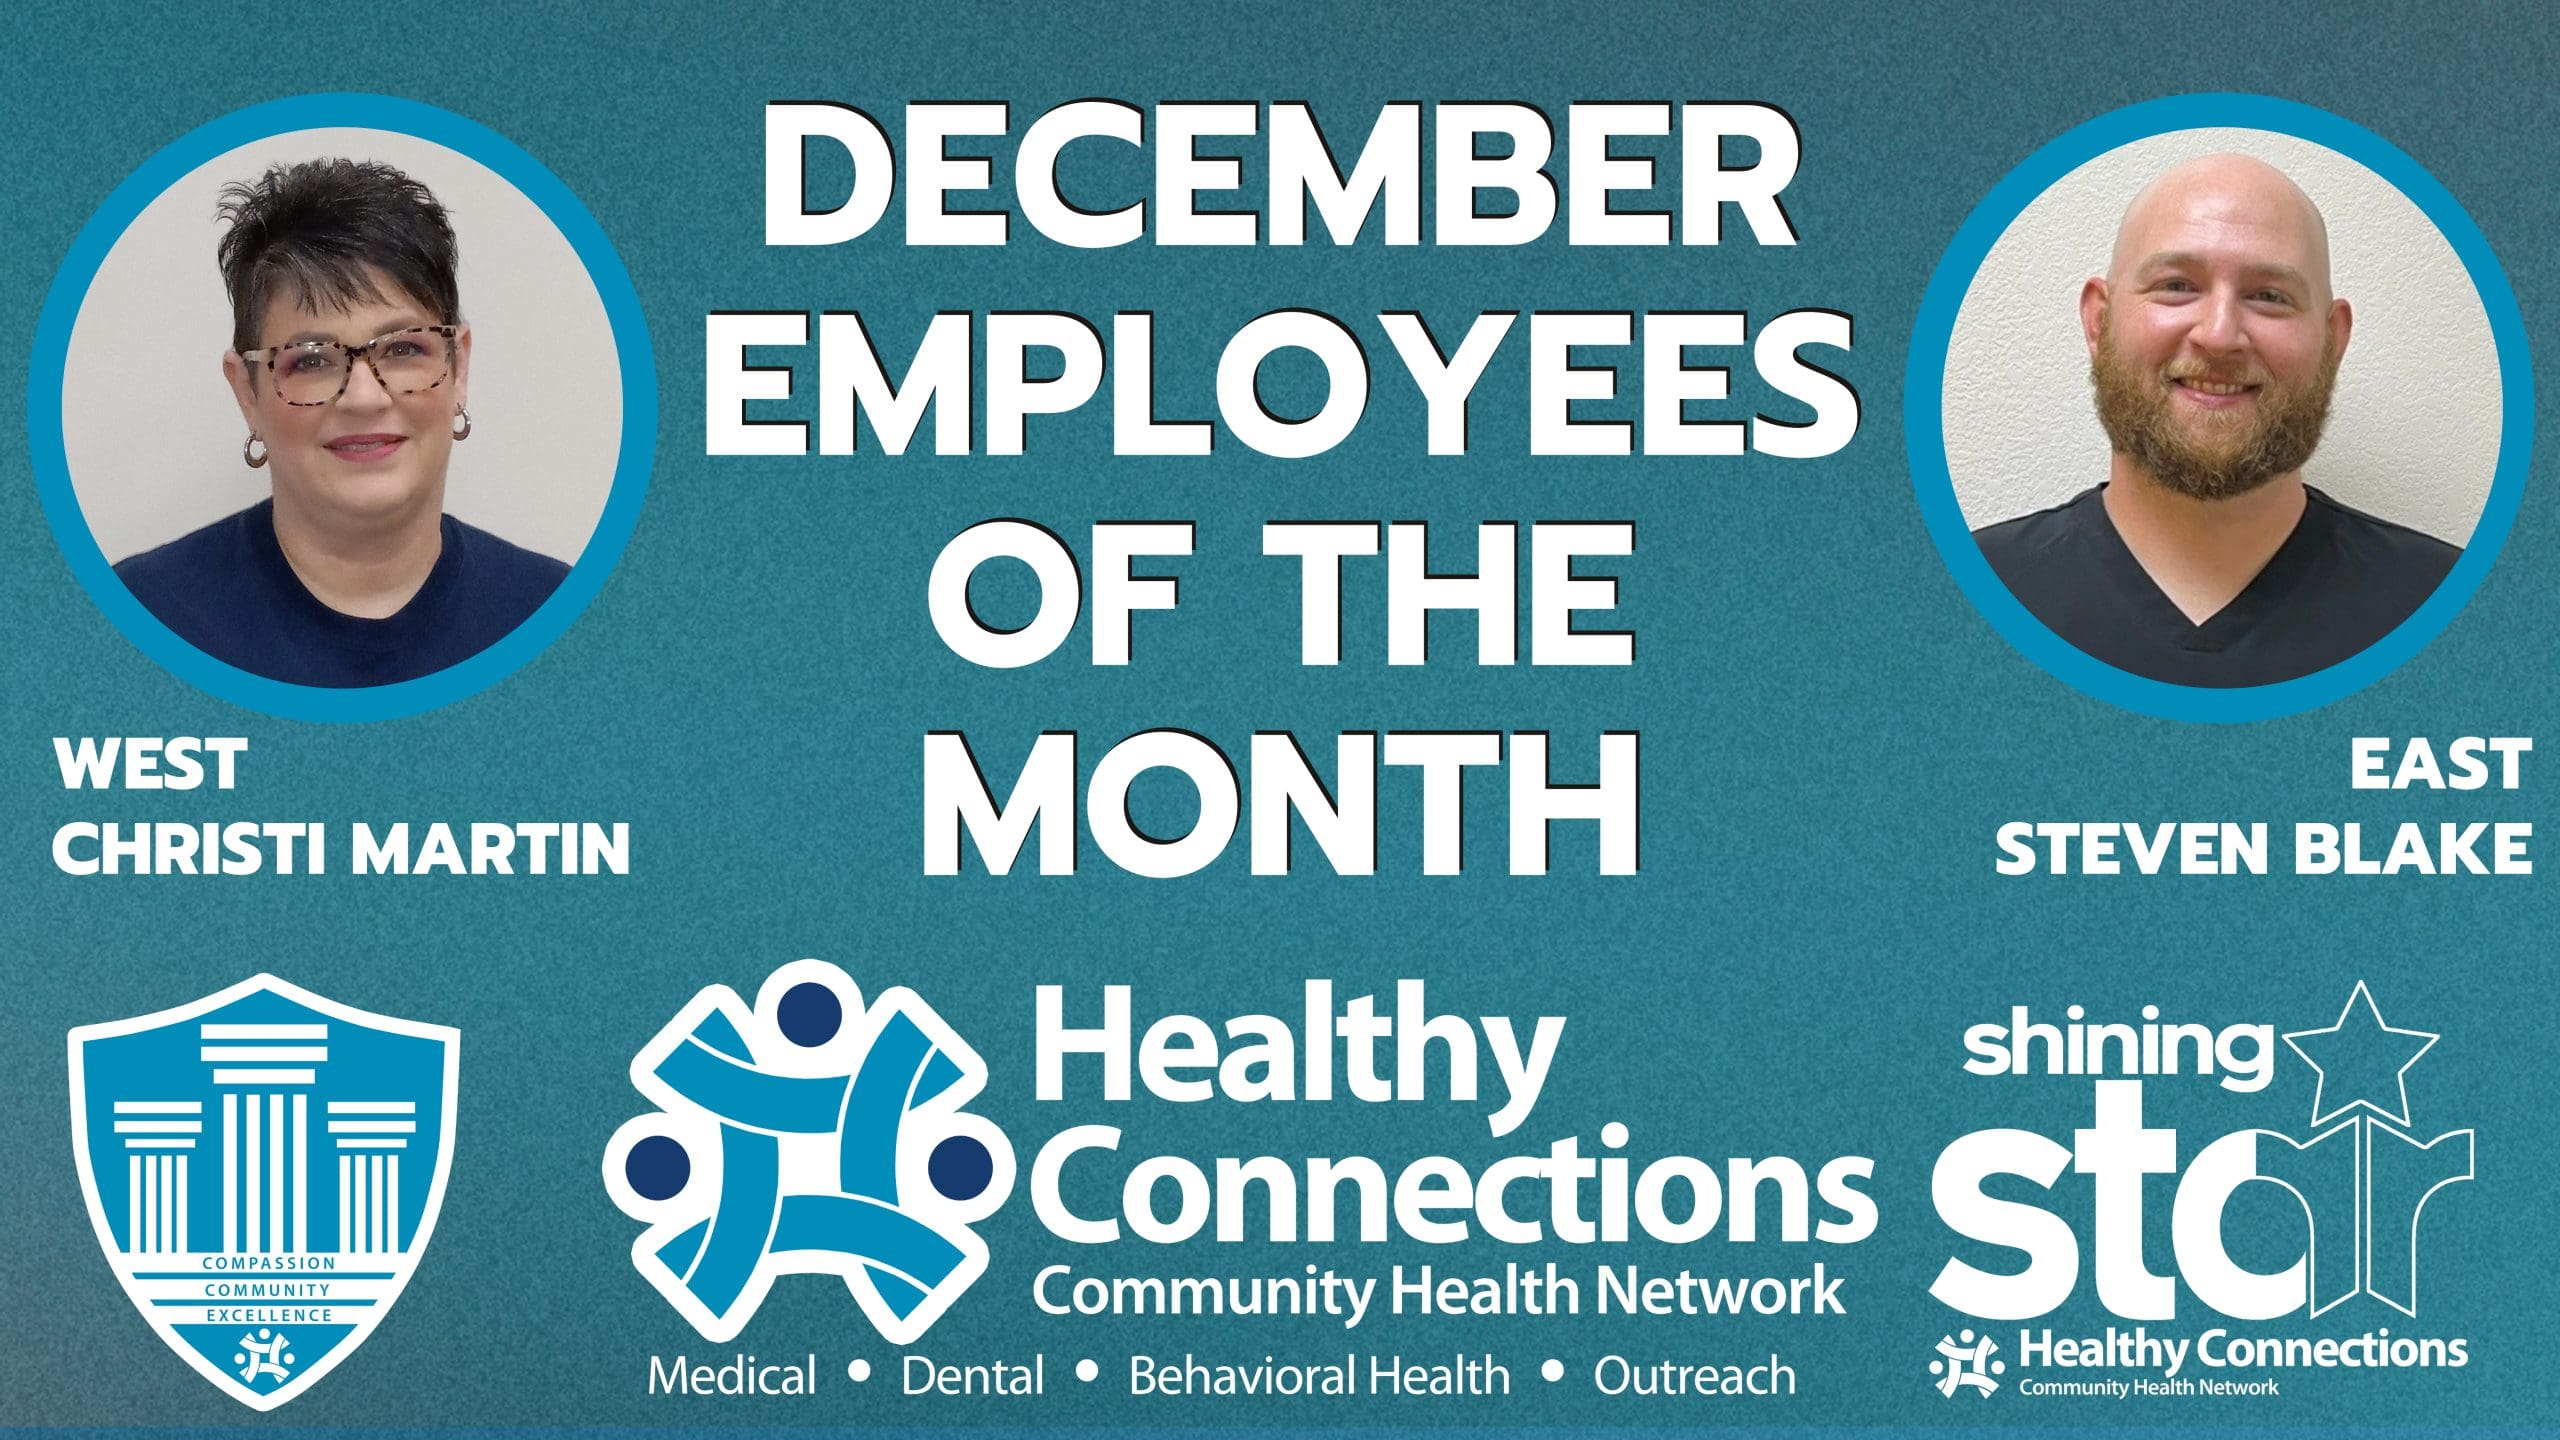 December Employees of the Month